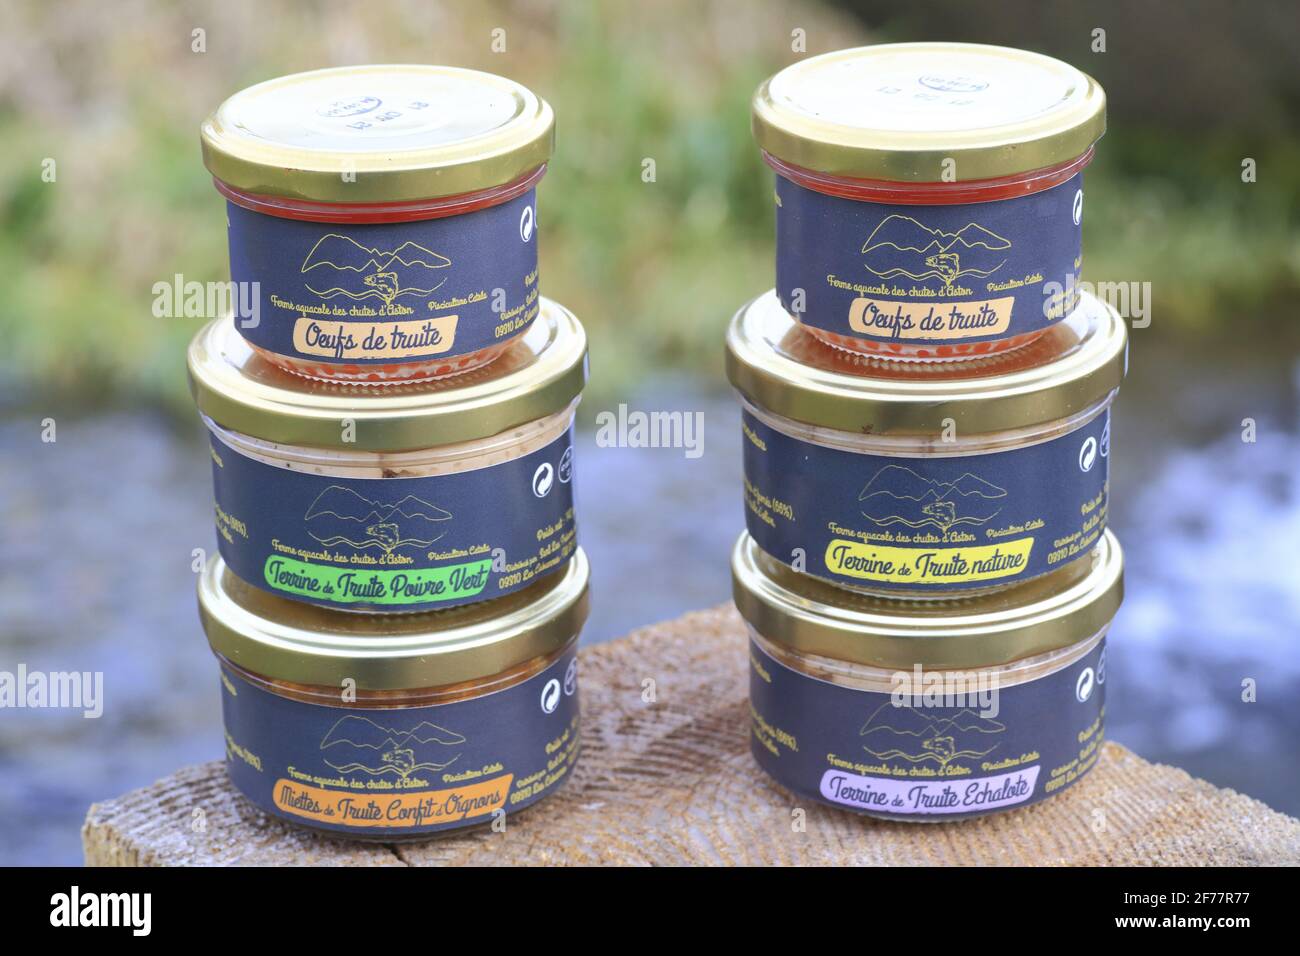 France, Ariege, Aston valley, Les Cabannes, Chutes D'Aston fish farm, products derived from farmed trout (eggs, terrines, rillette) Stock Photo